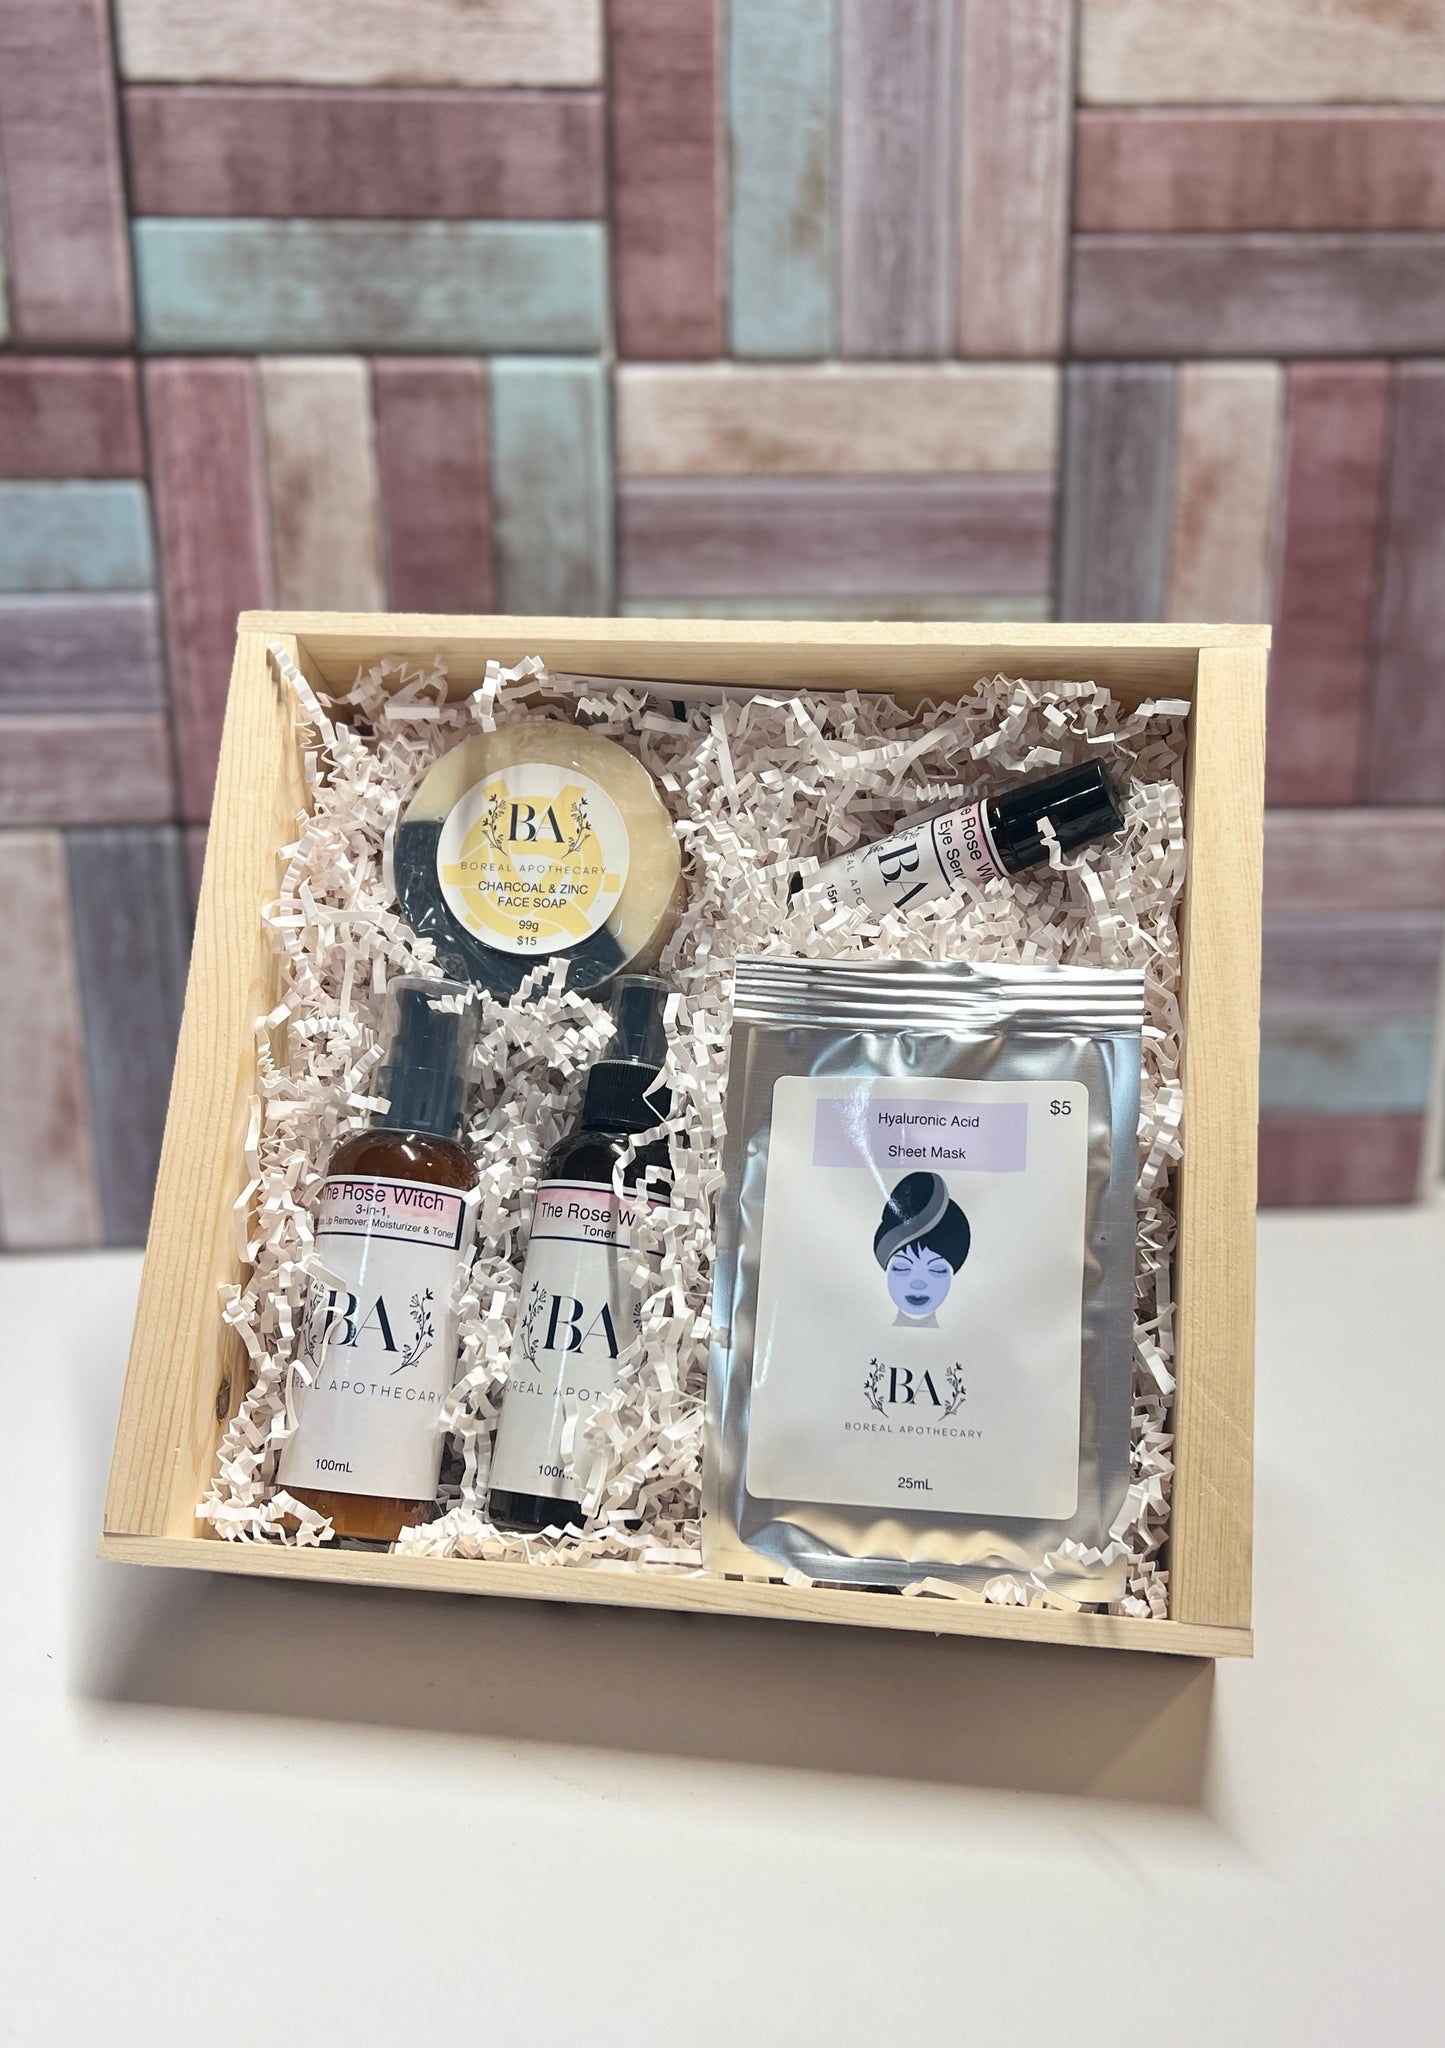 The Rose Witch Facial Kit includes: 1 - Charcoal & Zinc Soap, 1 - Reformulated Rose Witch 3 in 1 (now with Hyaluronic Acid), 1 - Rose Witch Toner, 1 - Rose Witch eye Serum and 1 - Hyaluronic Sheet Mask, all in a hand made Wood Crate.  Retail Value over $75. 